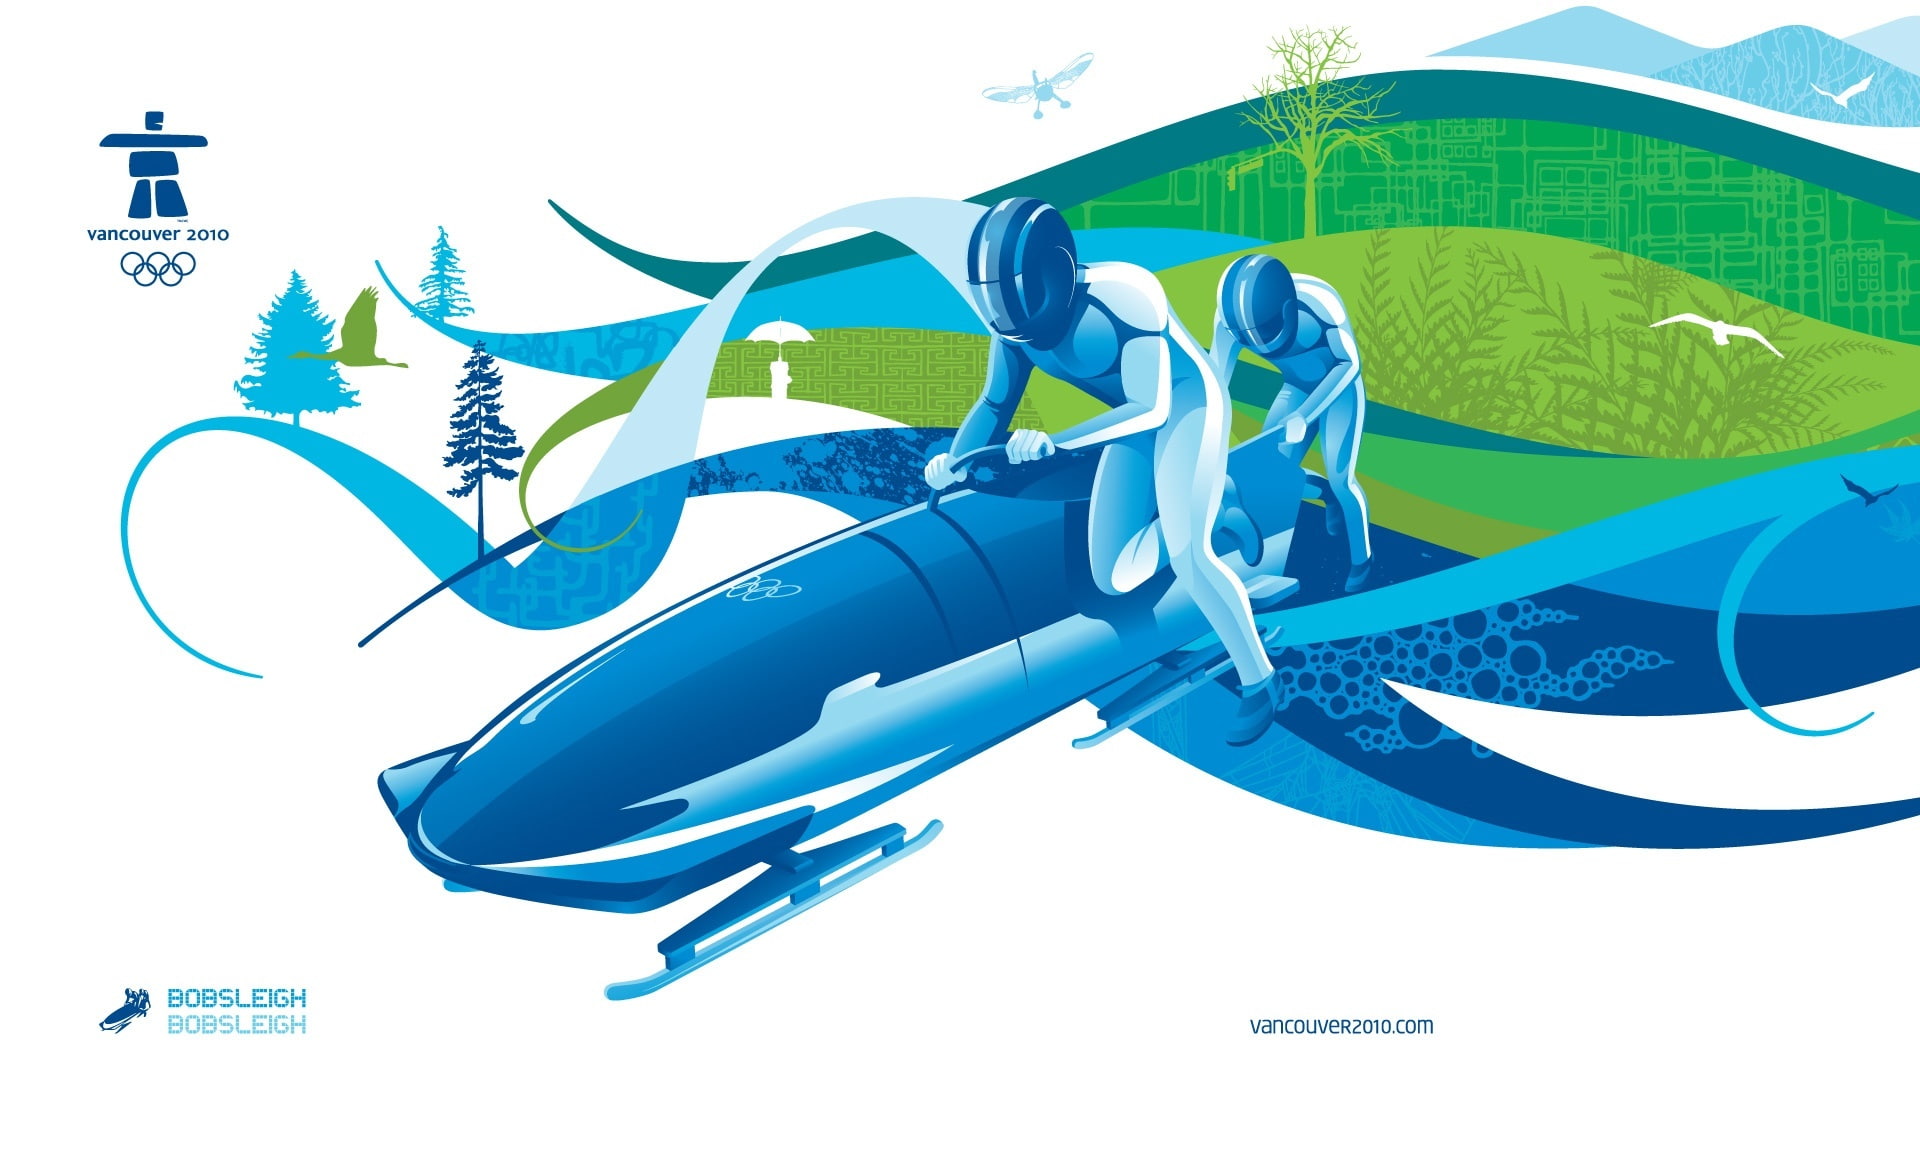 Bobsleigh, Sports, Winter Olympic Games, vancouver 2010, winter sport